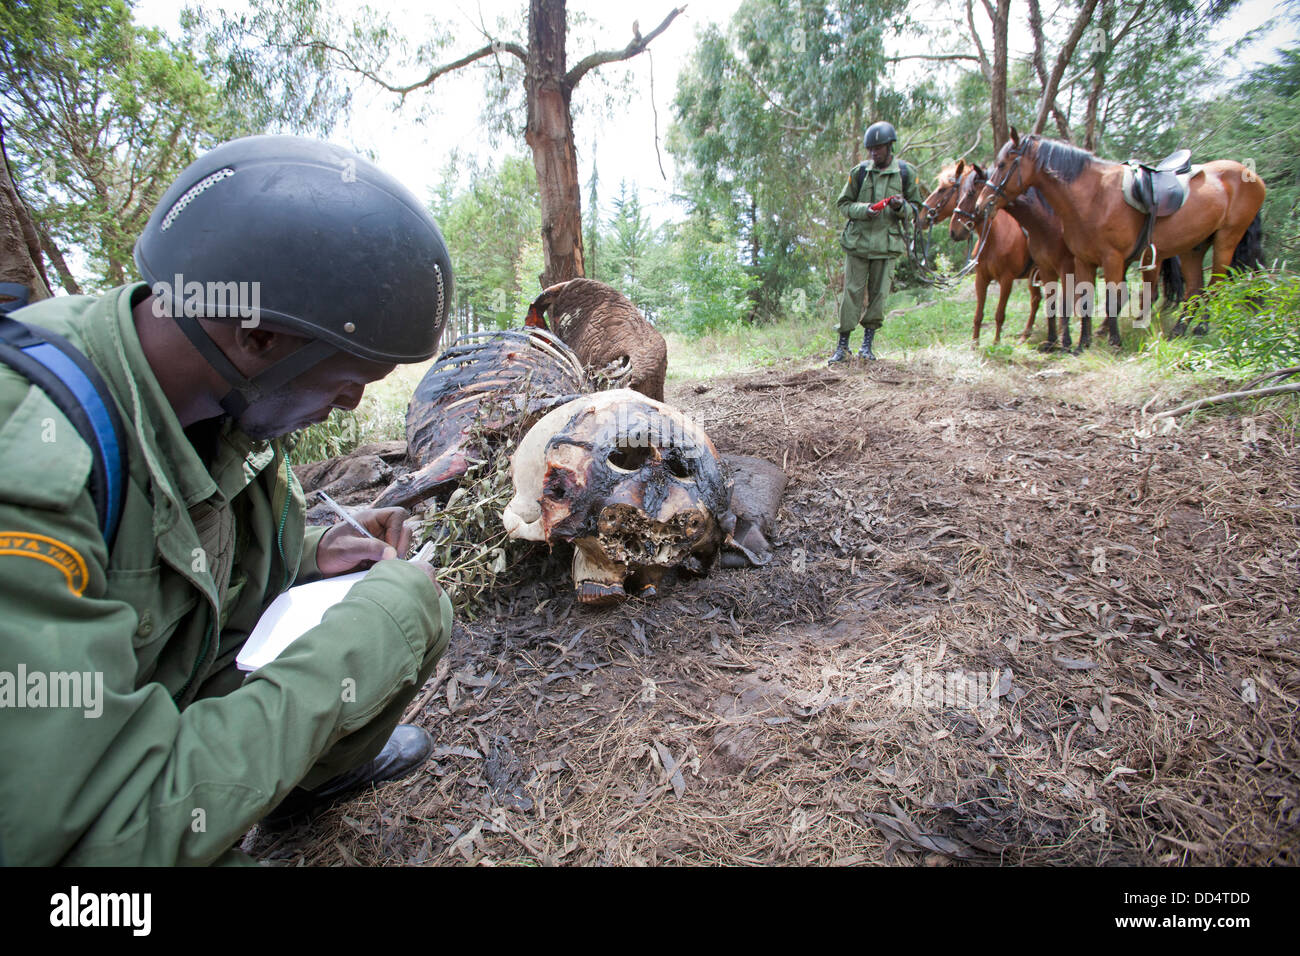 Anti-poaching patrol on horseback record information about an elephant carcass poached for ivory and meat, Mount Kenya NP, Kenya Stock Photo